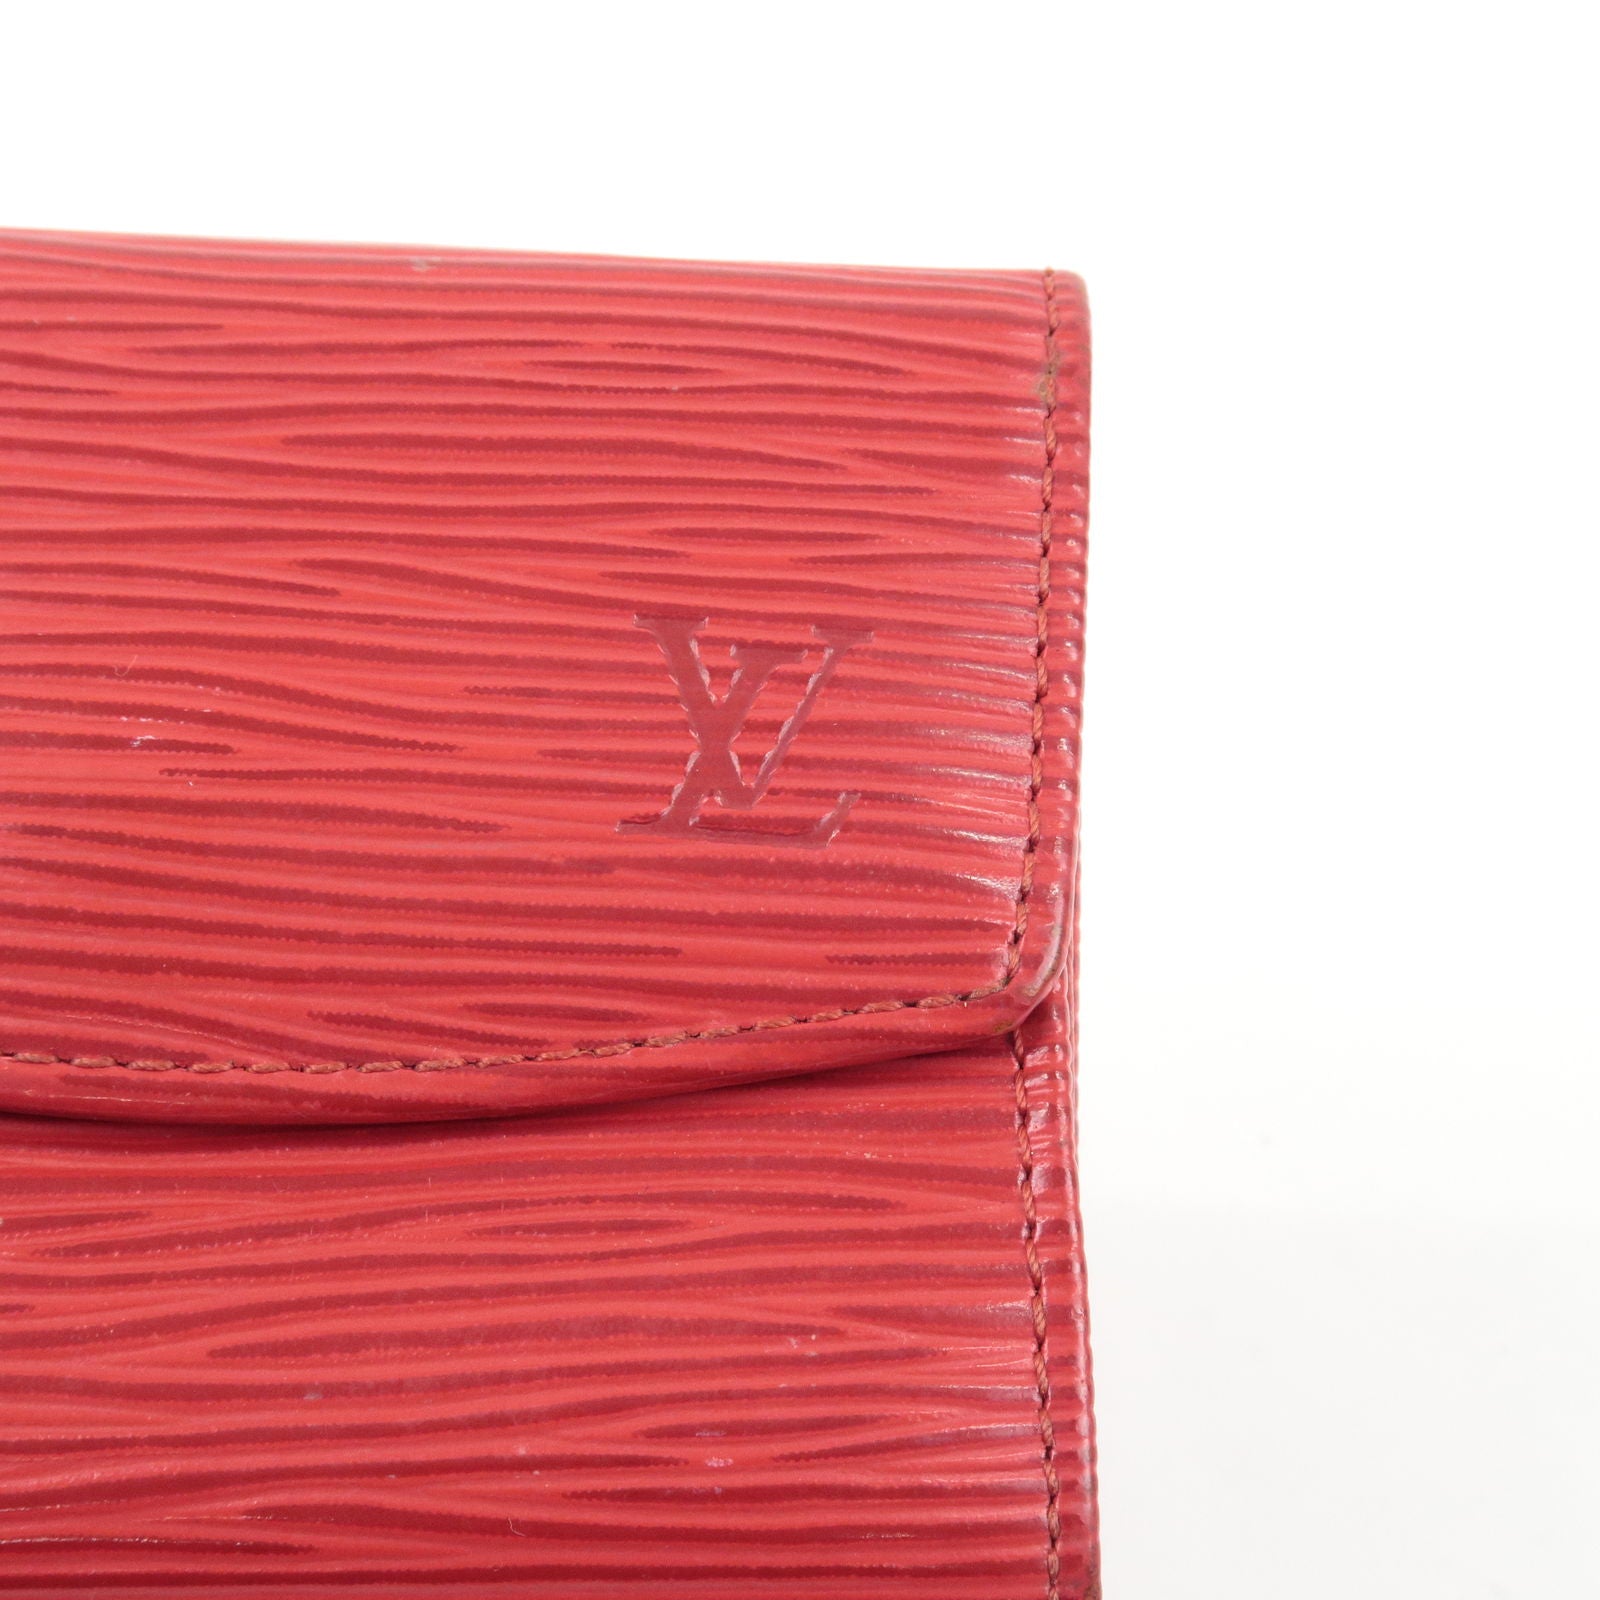 Louis Vuitton Womens Coin Cases, Red